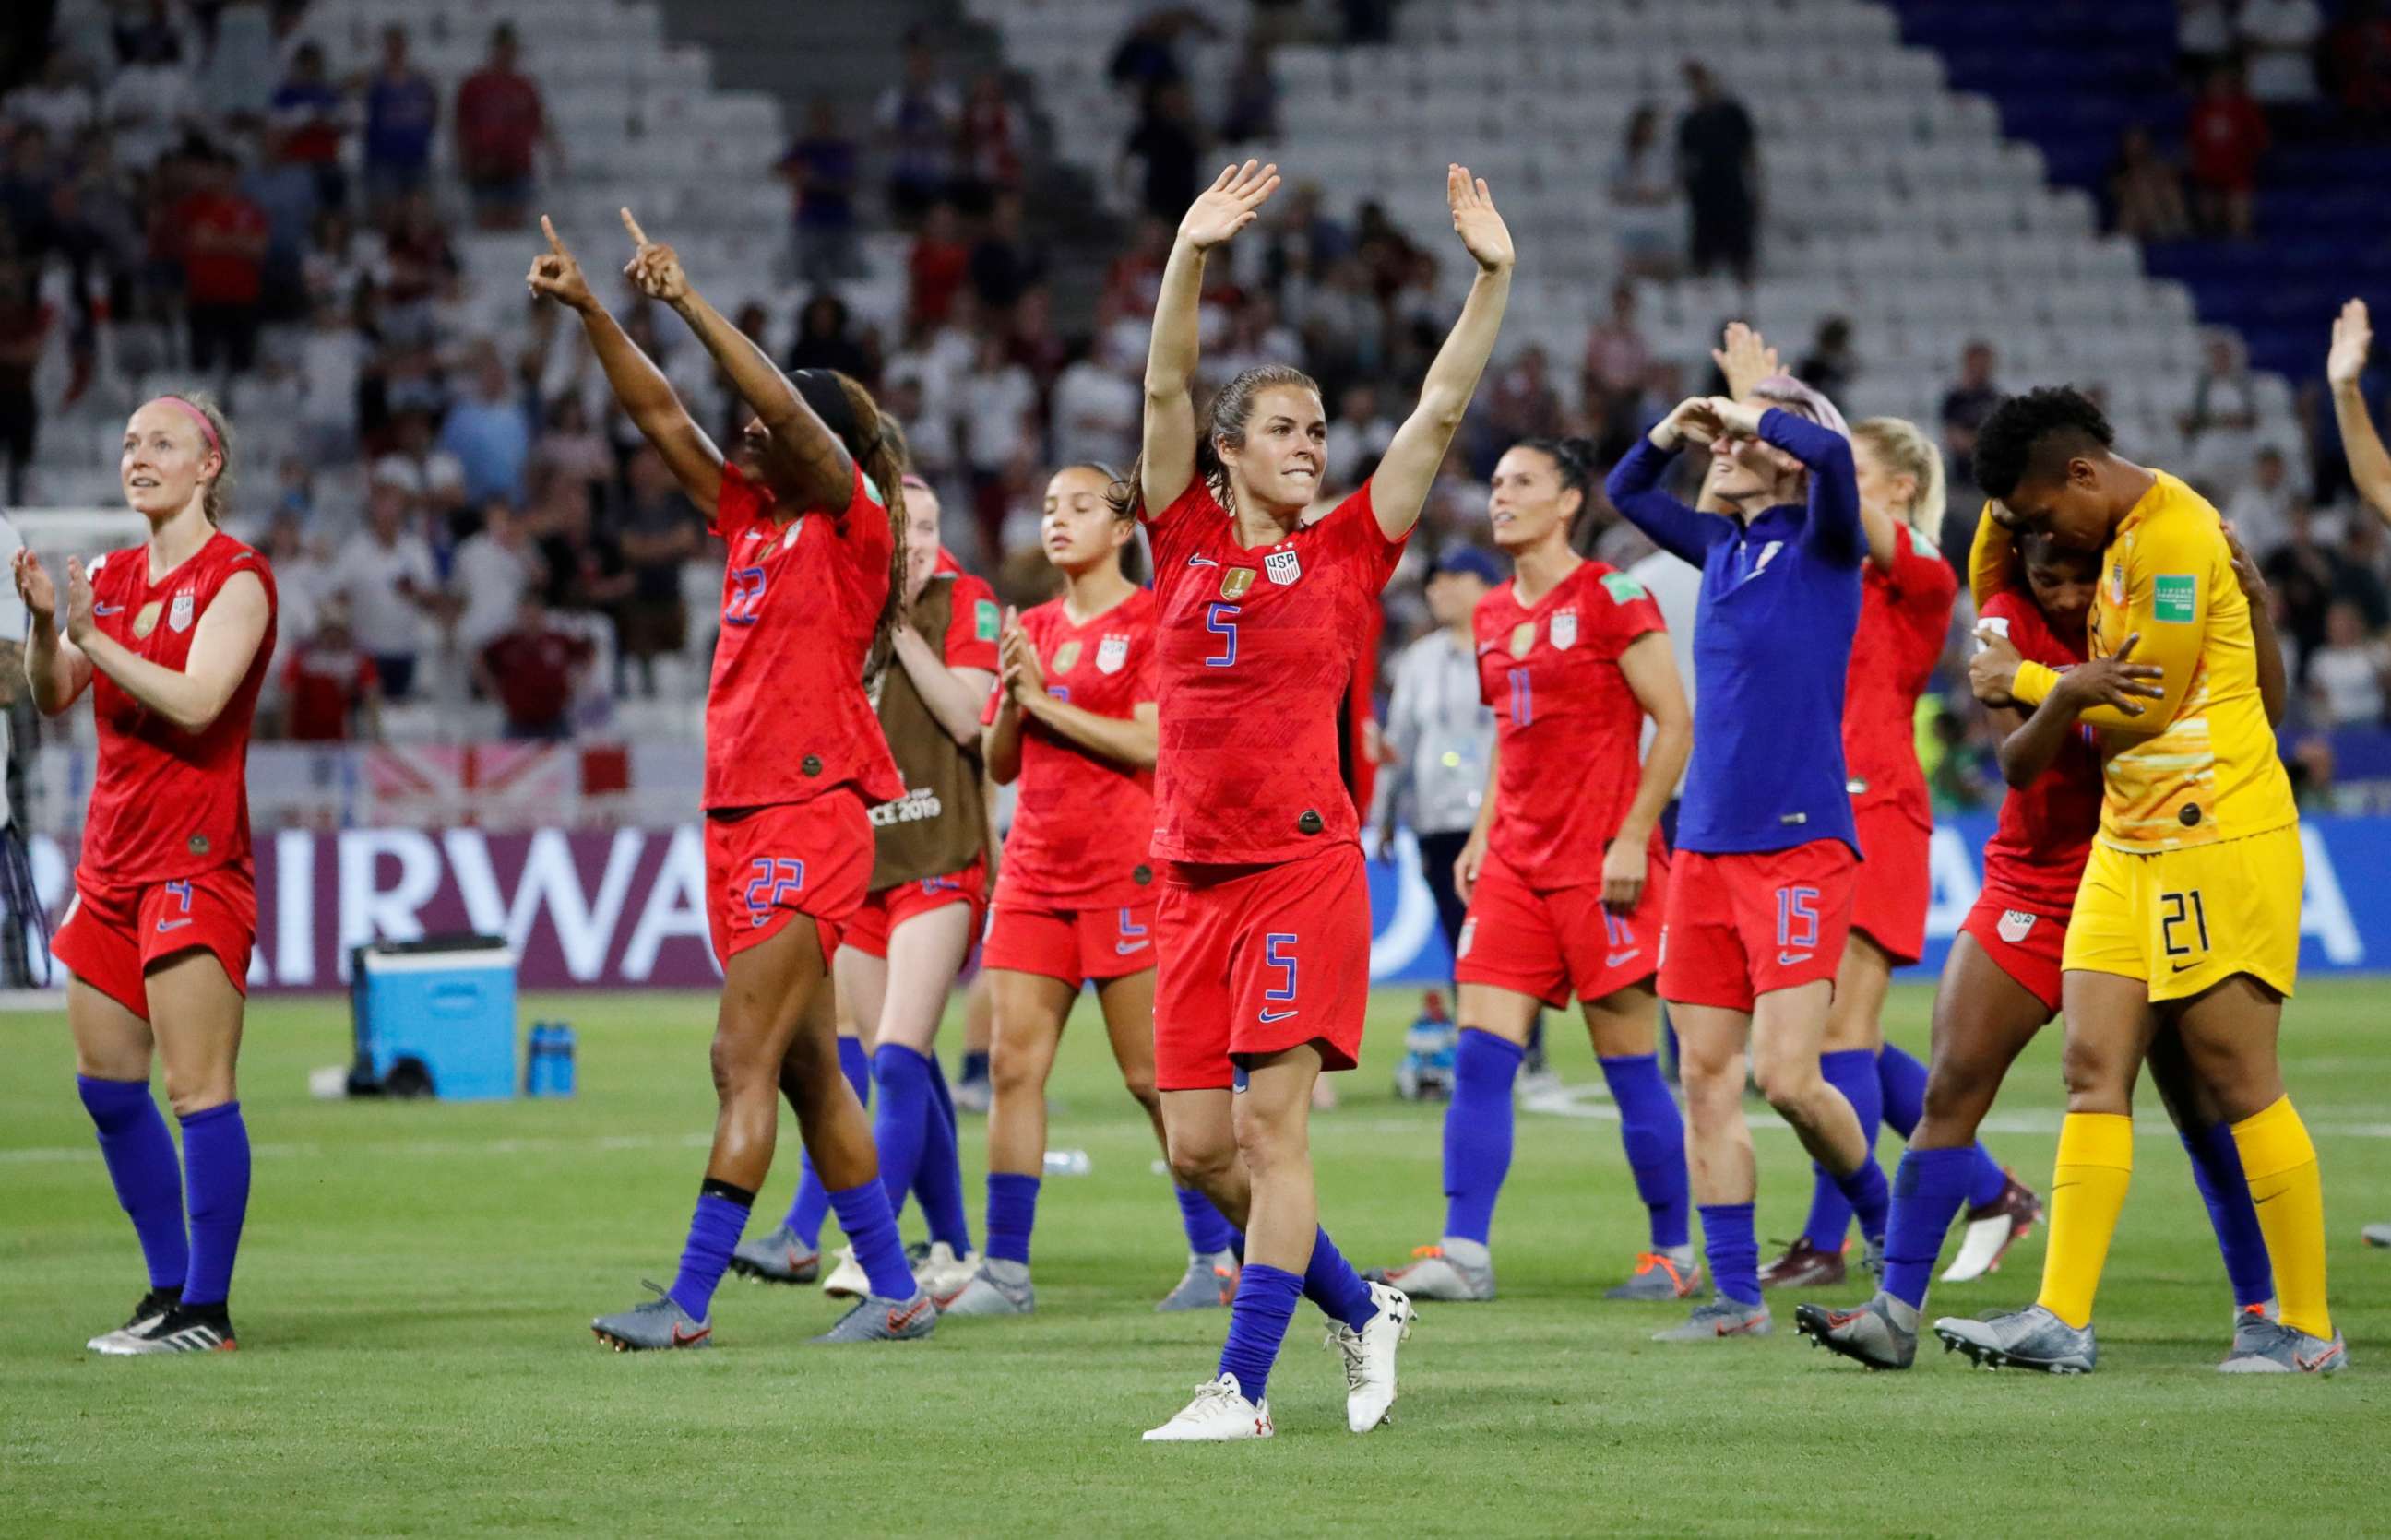 PHOTO: Kelley O'Hara of the U.S. and teammates celebrate winning the Women's World Cup Semi Final match between England and the US, July 2, 2019, in Lyon, France.